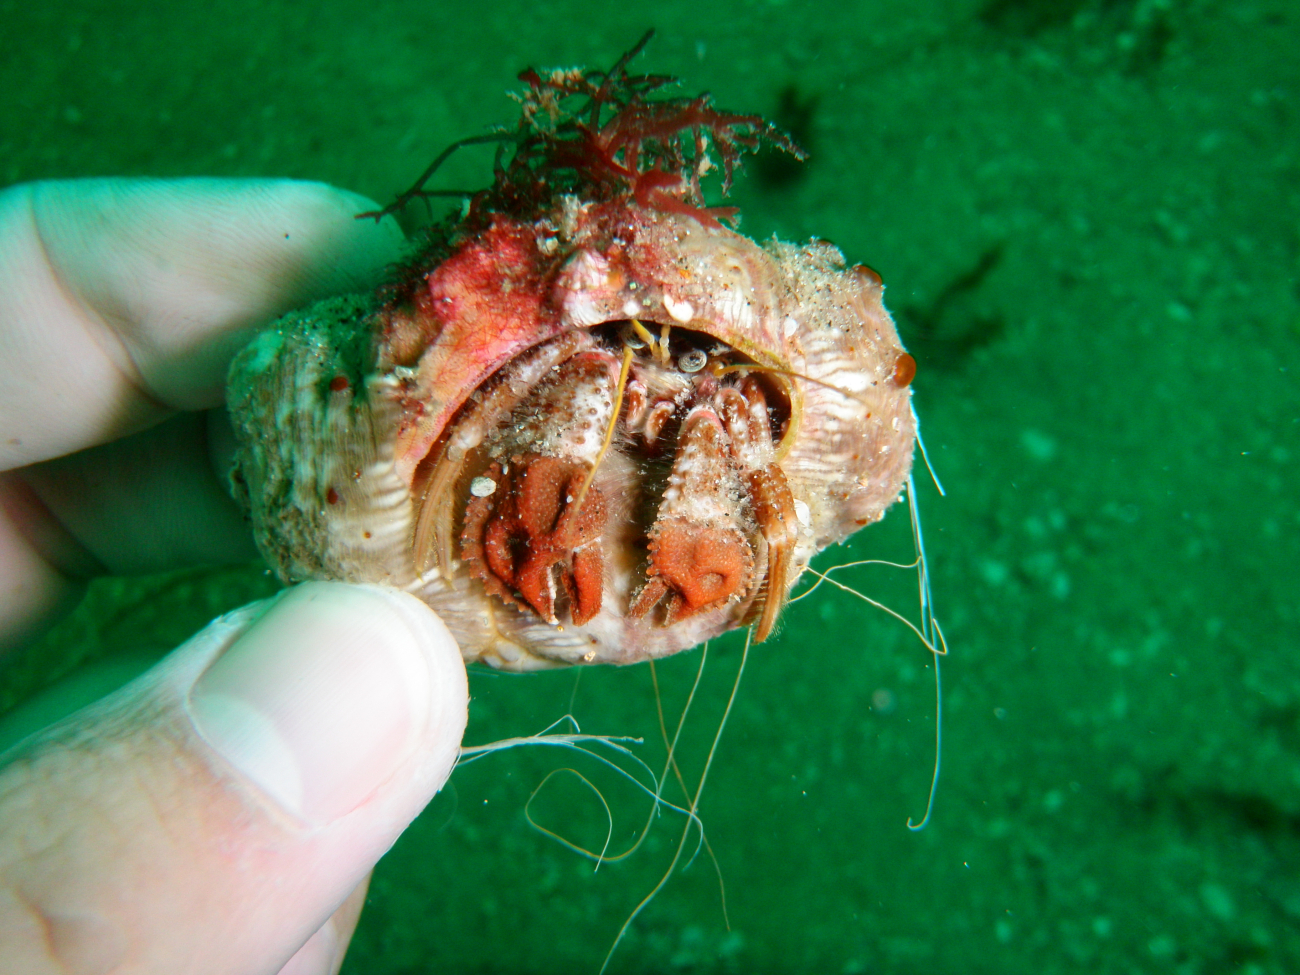 A hermit crab peering out from its shell